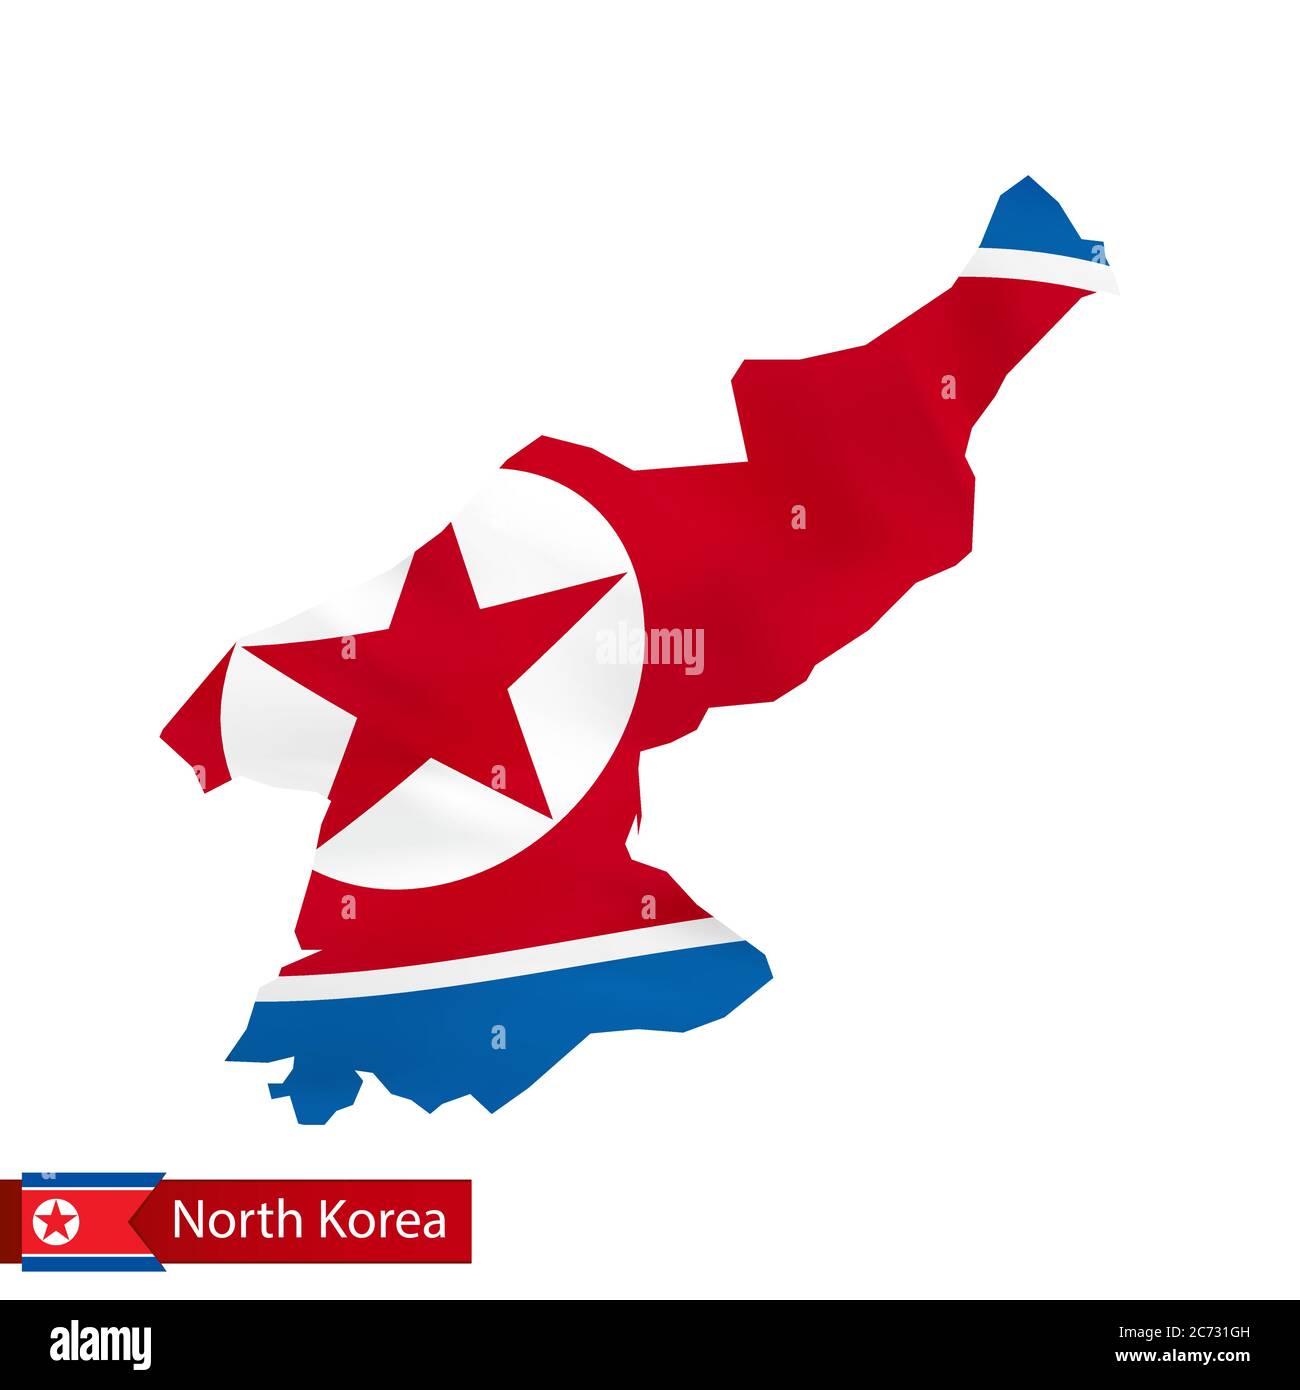 North Korea Map With Waving Flag Of Country Vector Illustration 2C731GH 